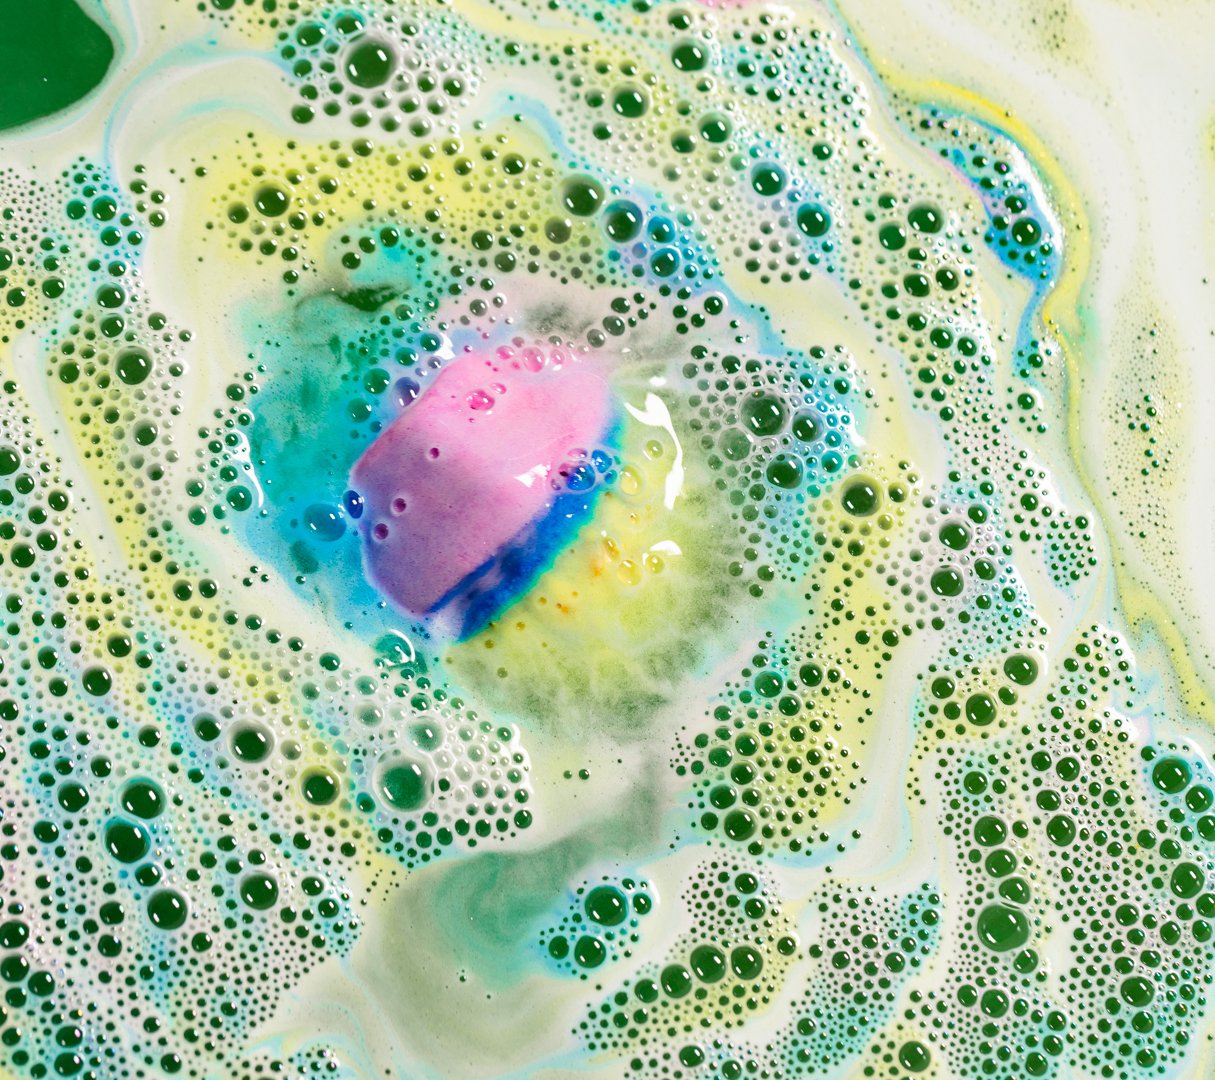 A pink, blue and yellow coloured bath bromb fizzes in bubbly waves of pastel yellow and blue foam, revealing green water below.